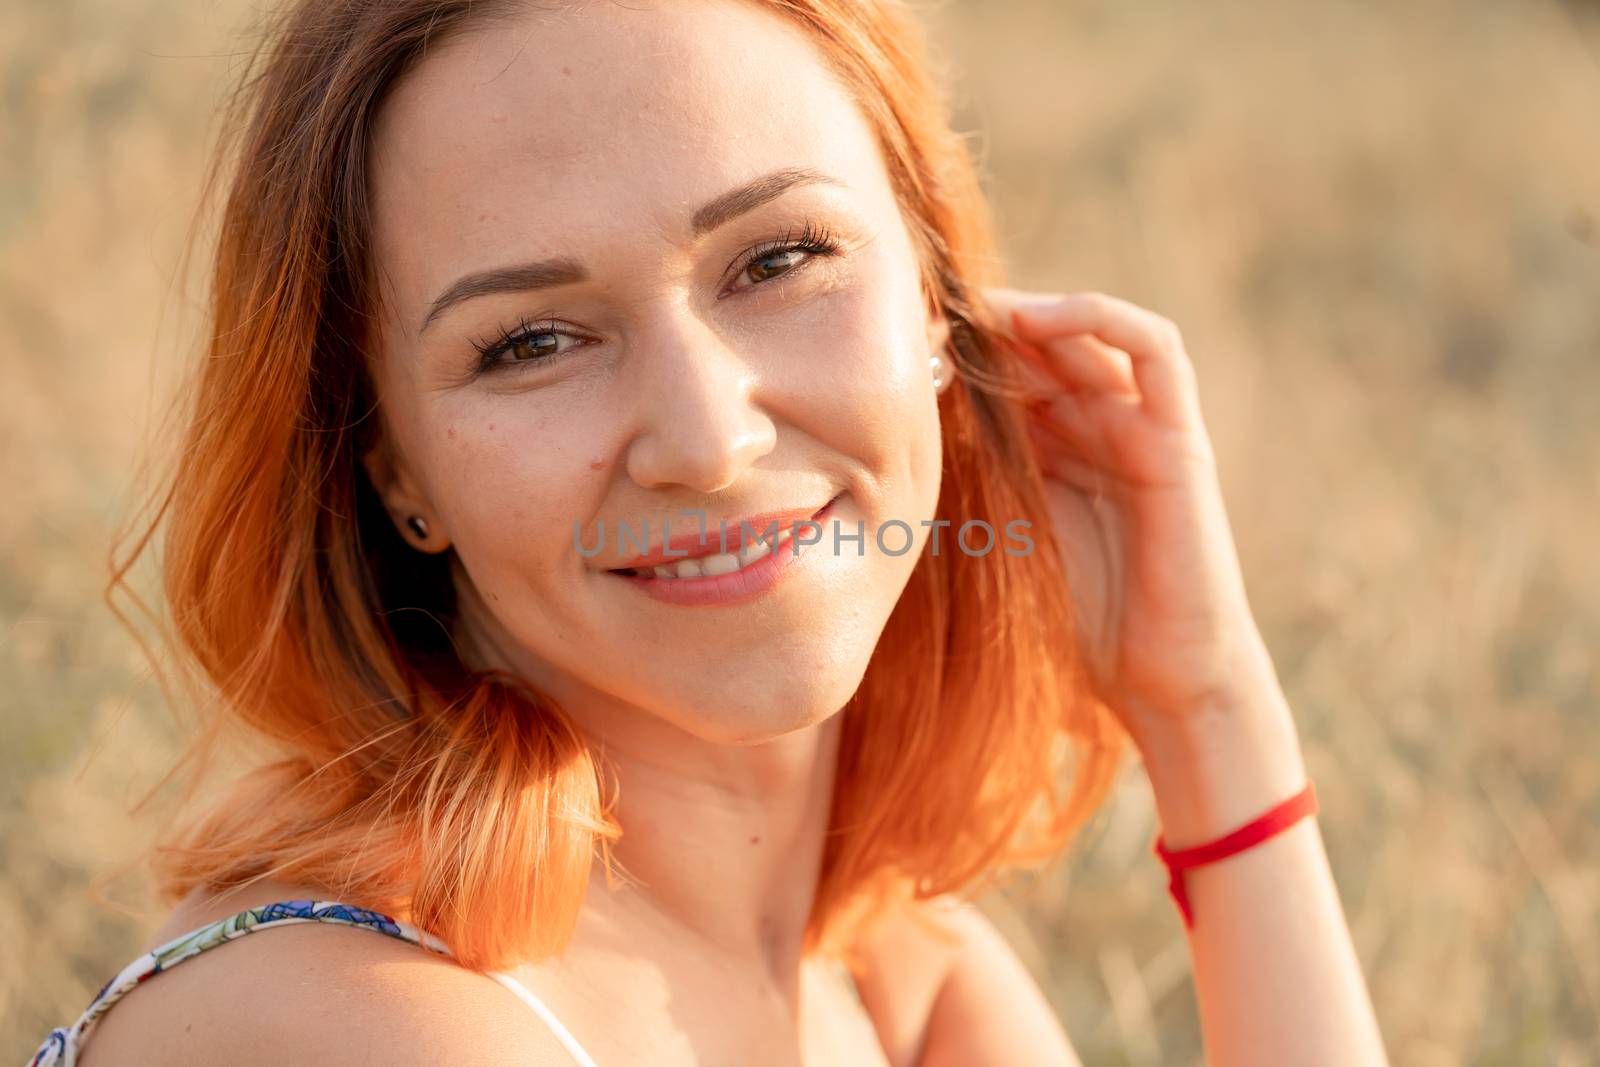 Tender beautiful red-haired girl enjoys the sunset in a field with a hill